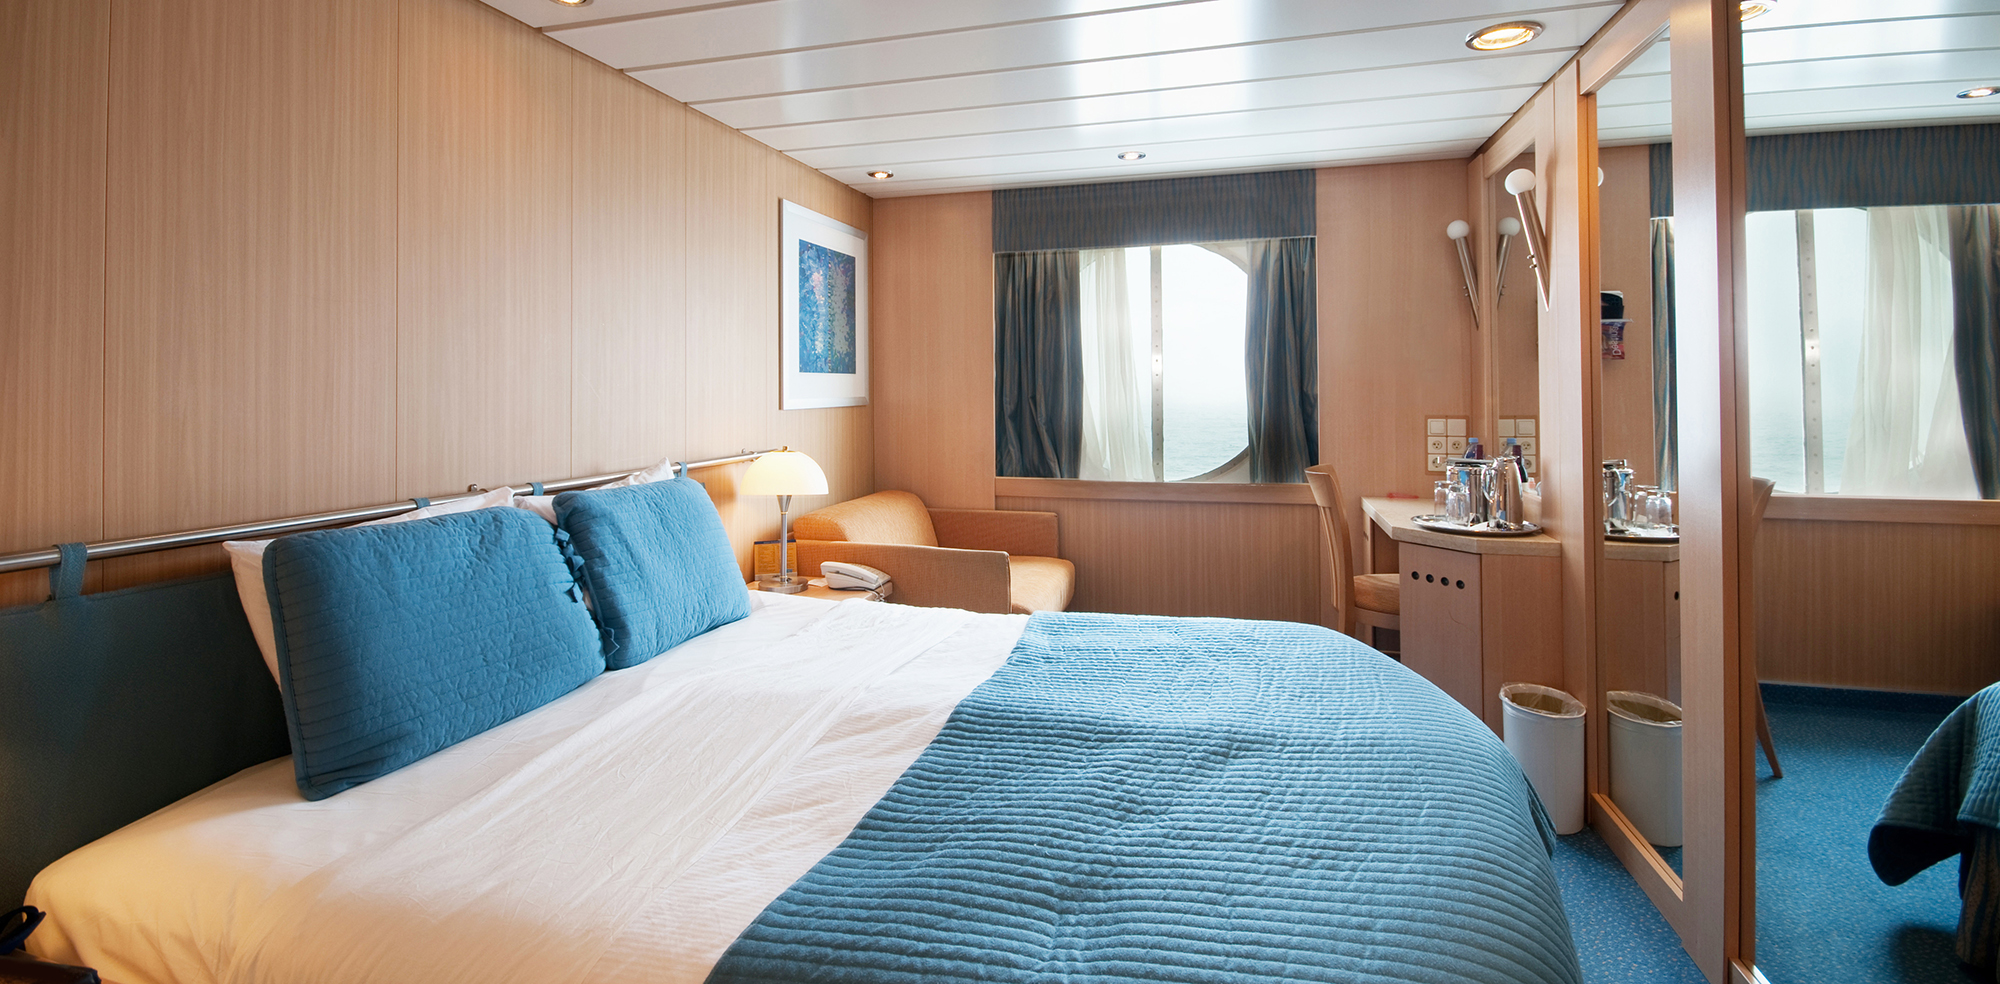 4 Golden Rules To Find The Best Cruise Ship Cabin Oversixty